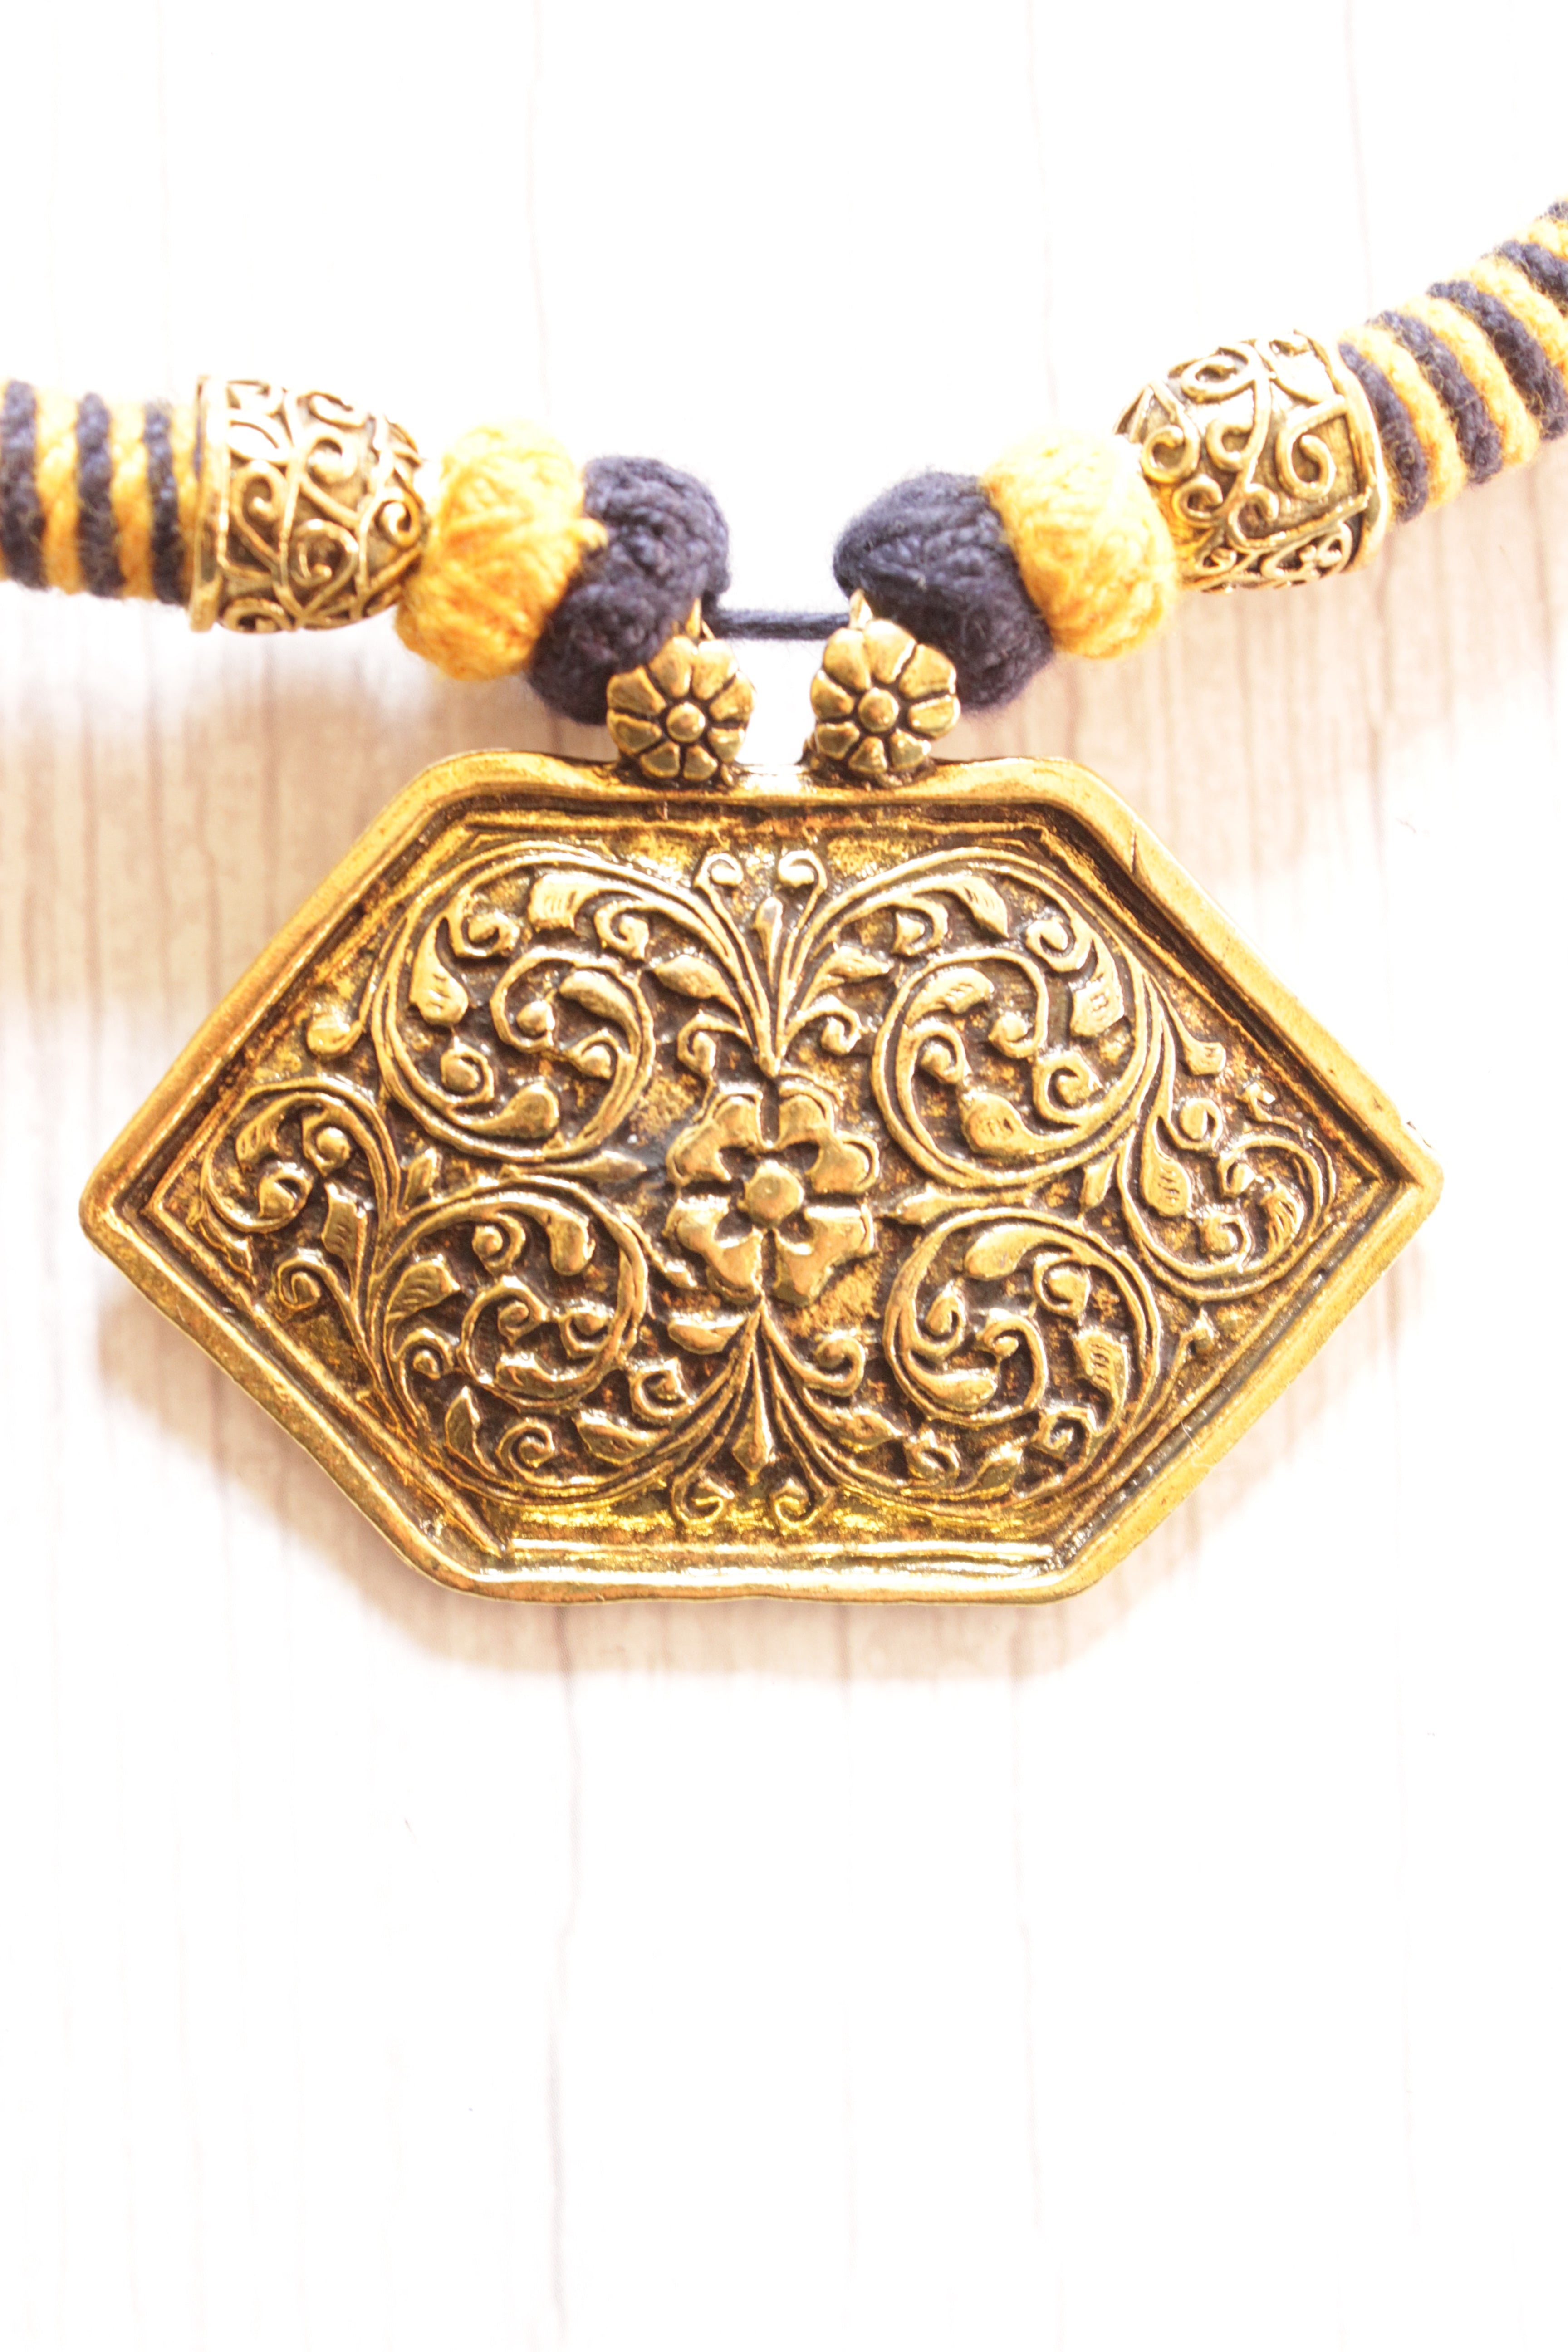 Hasli Style Twisted Fabric Choker Necklace with Antique Gold Finish Metal Pendant